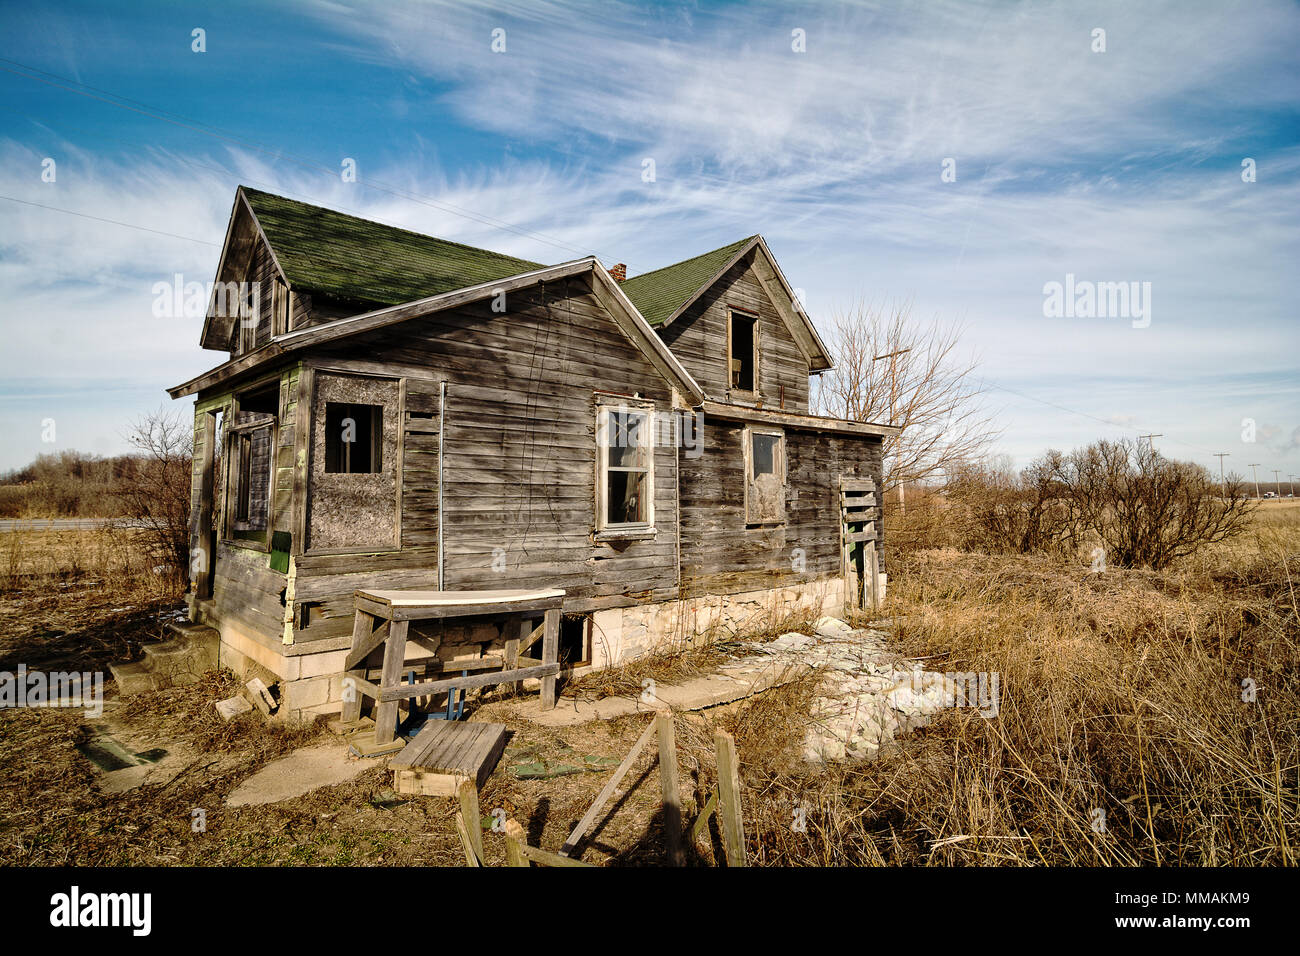 Photo of an old scary abandoned farm house that is deteriorating with time and neglect. Stock Photo